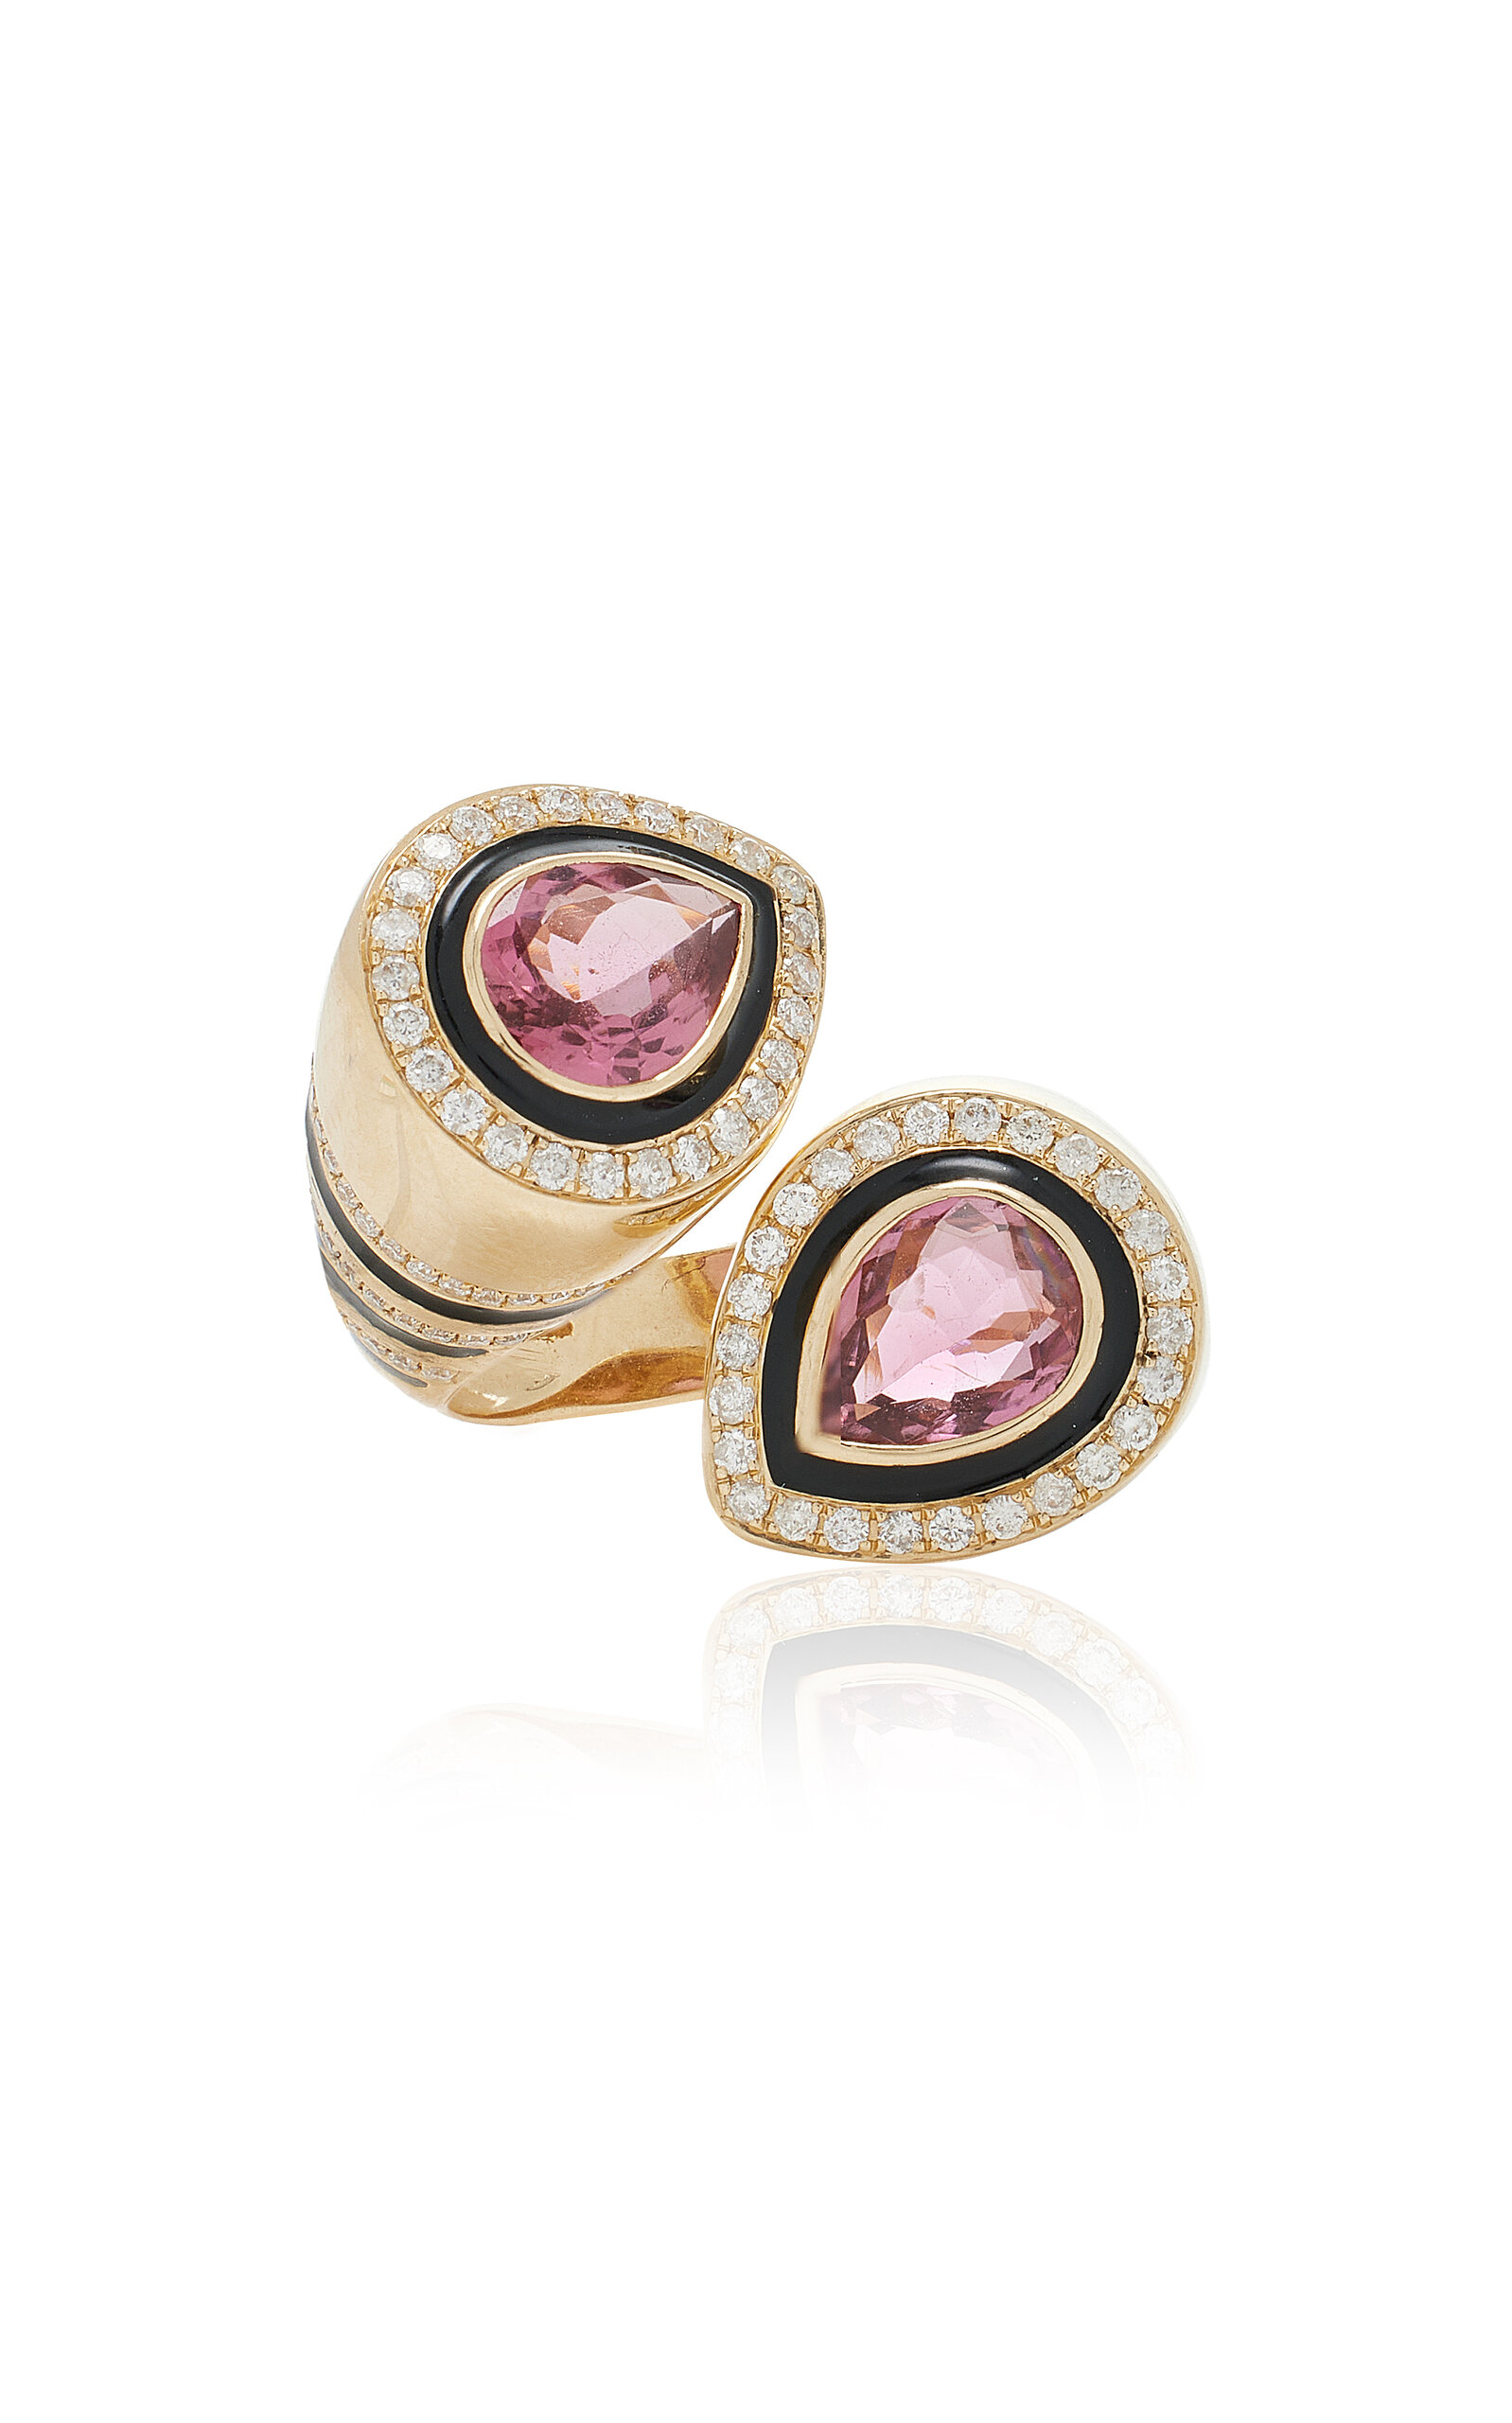 Eden Presley Bypass 14k Yellow Gold Tourmaline Ring In Pink